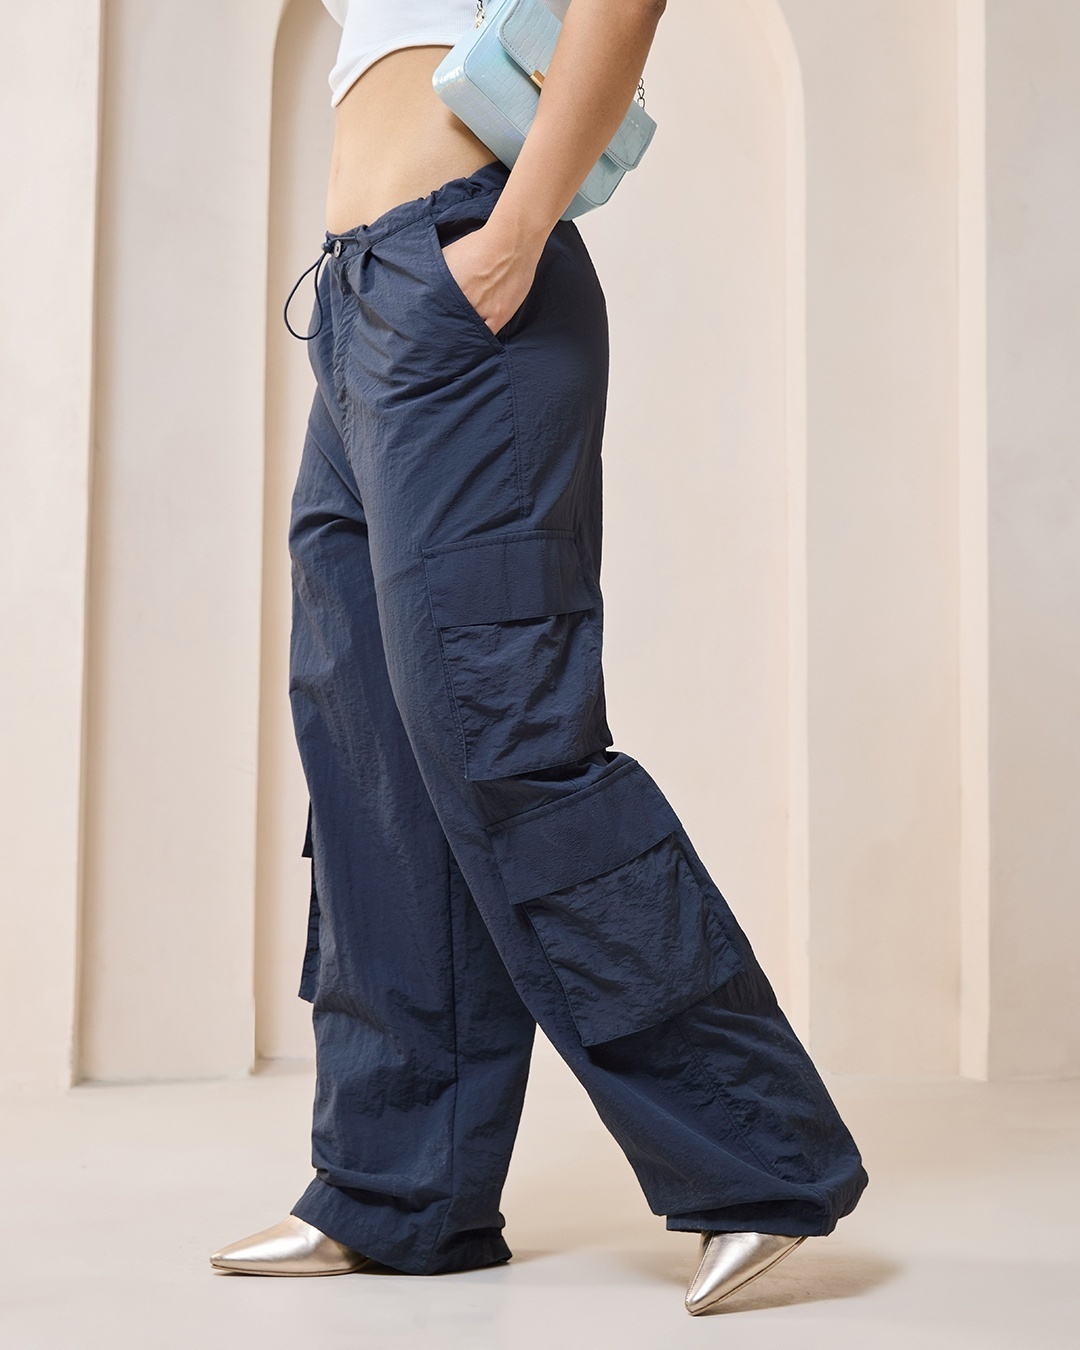 model wearing Round Neck T-shirt with parachute pant